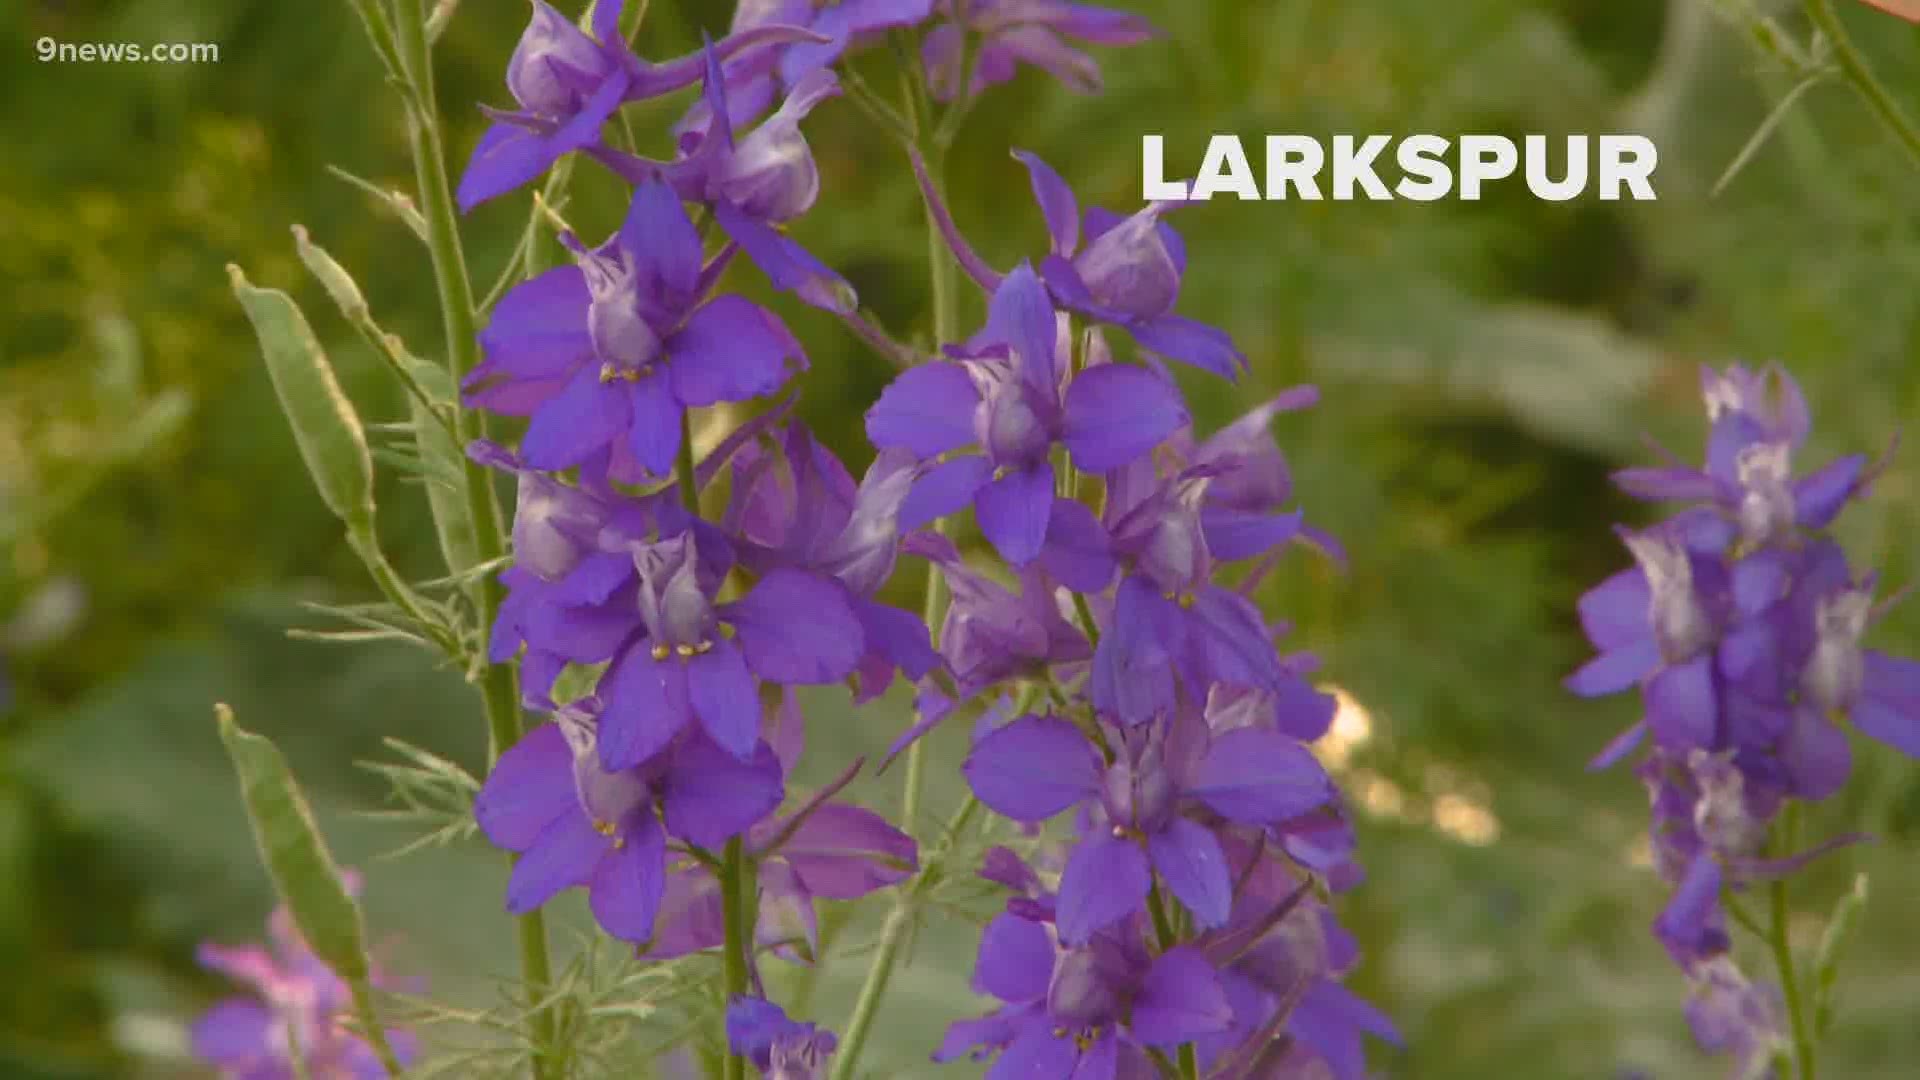 Larkspur is related to delphinium but doesn't need staking. The intensely-blue flowers (or sometimes pink, lavender or white) appear in June.